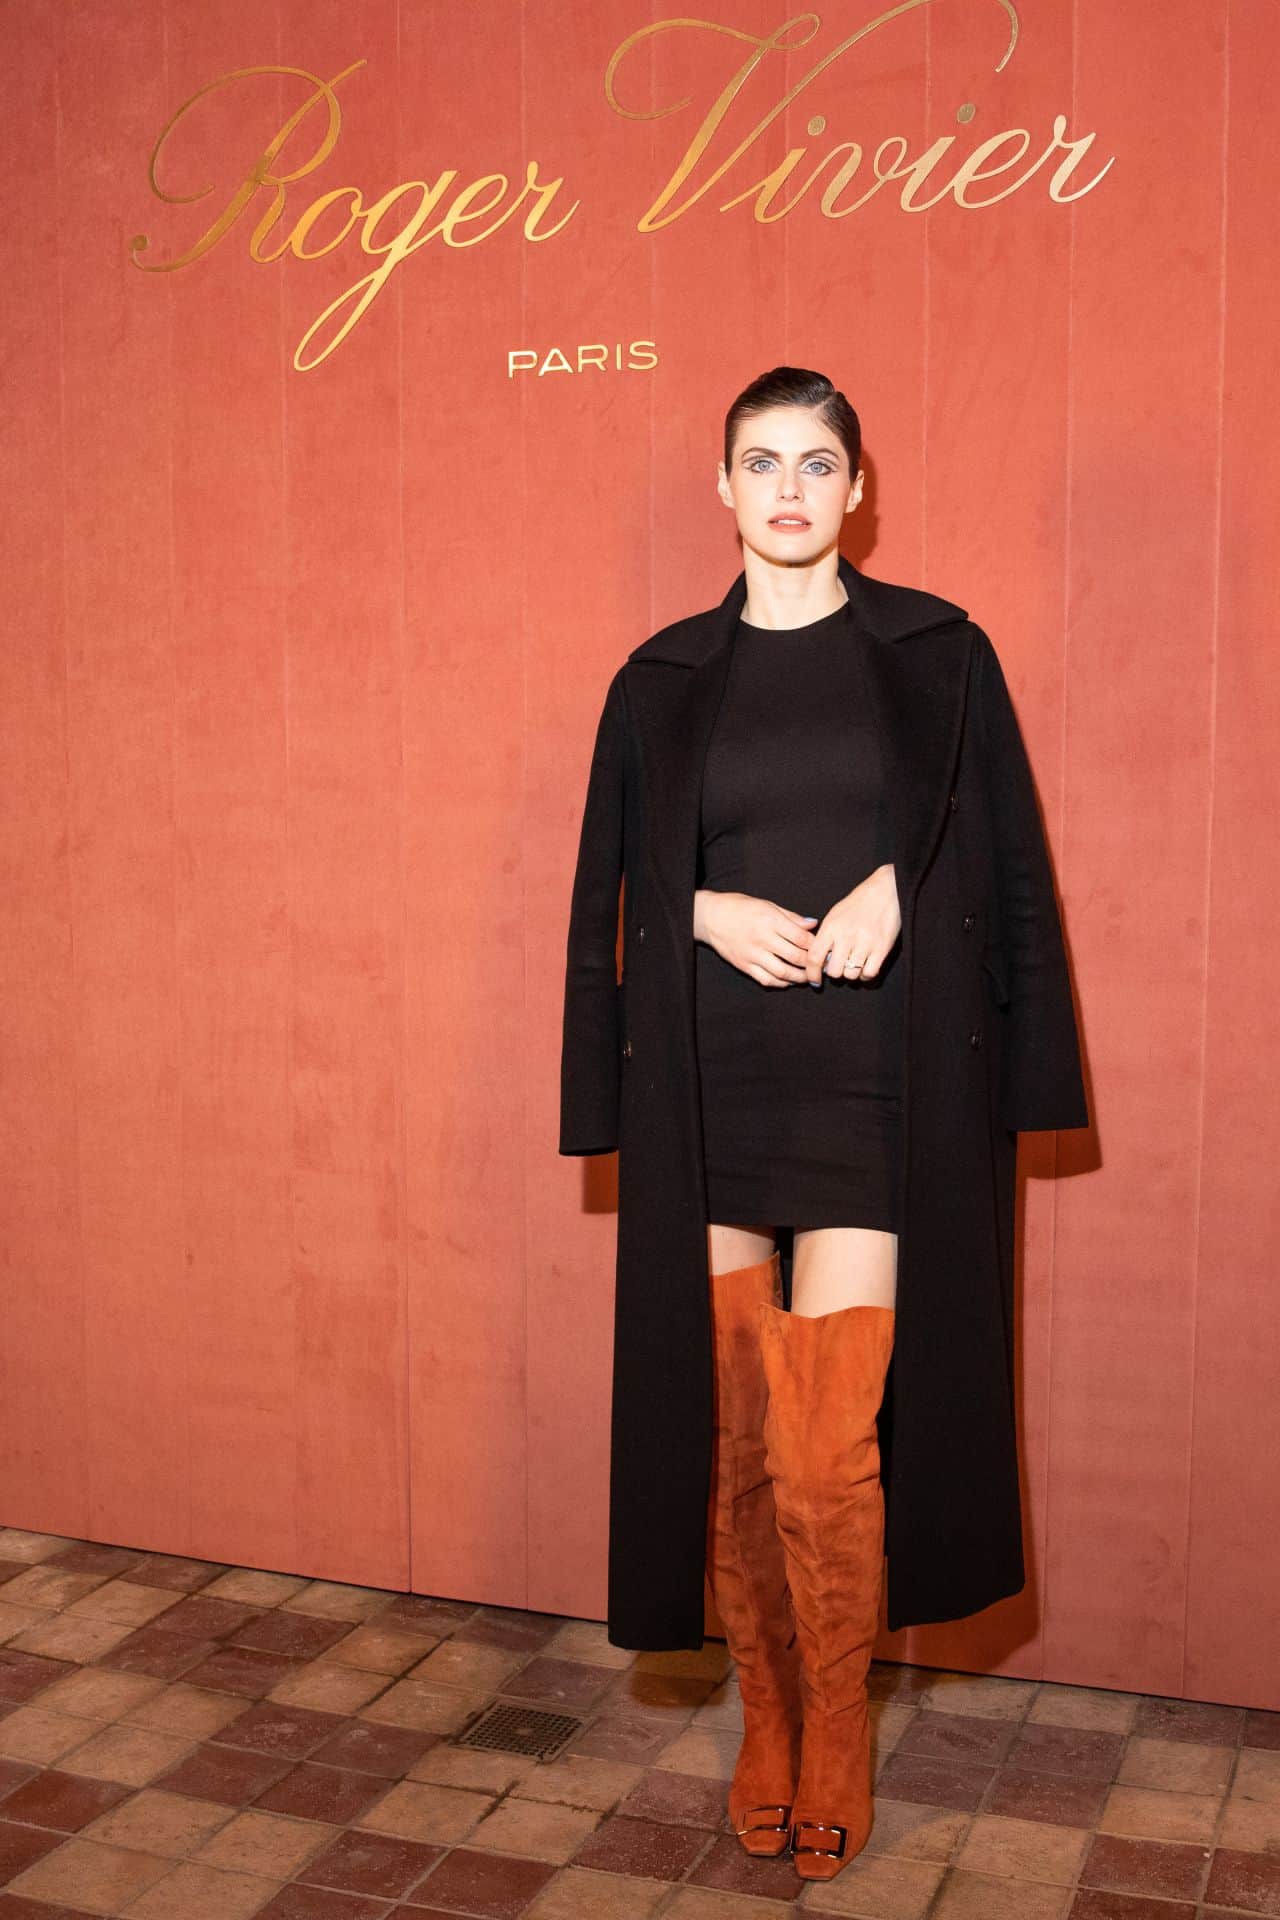 Alexandra Daddario Impresses in Chic and Stylish Ensemble at Roger Vivier Dinner Event